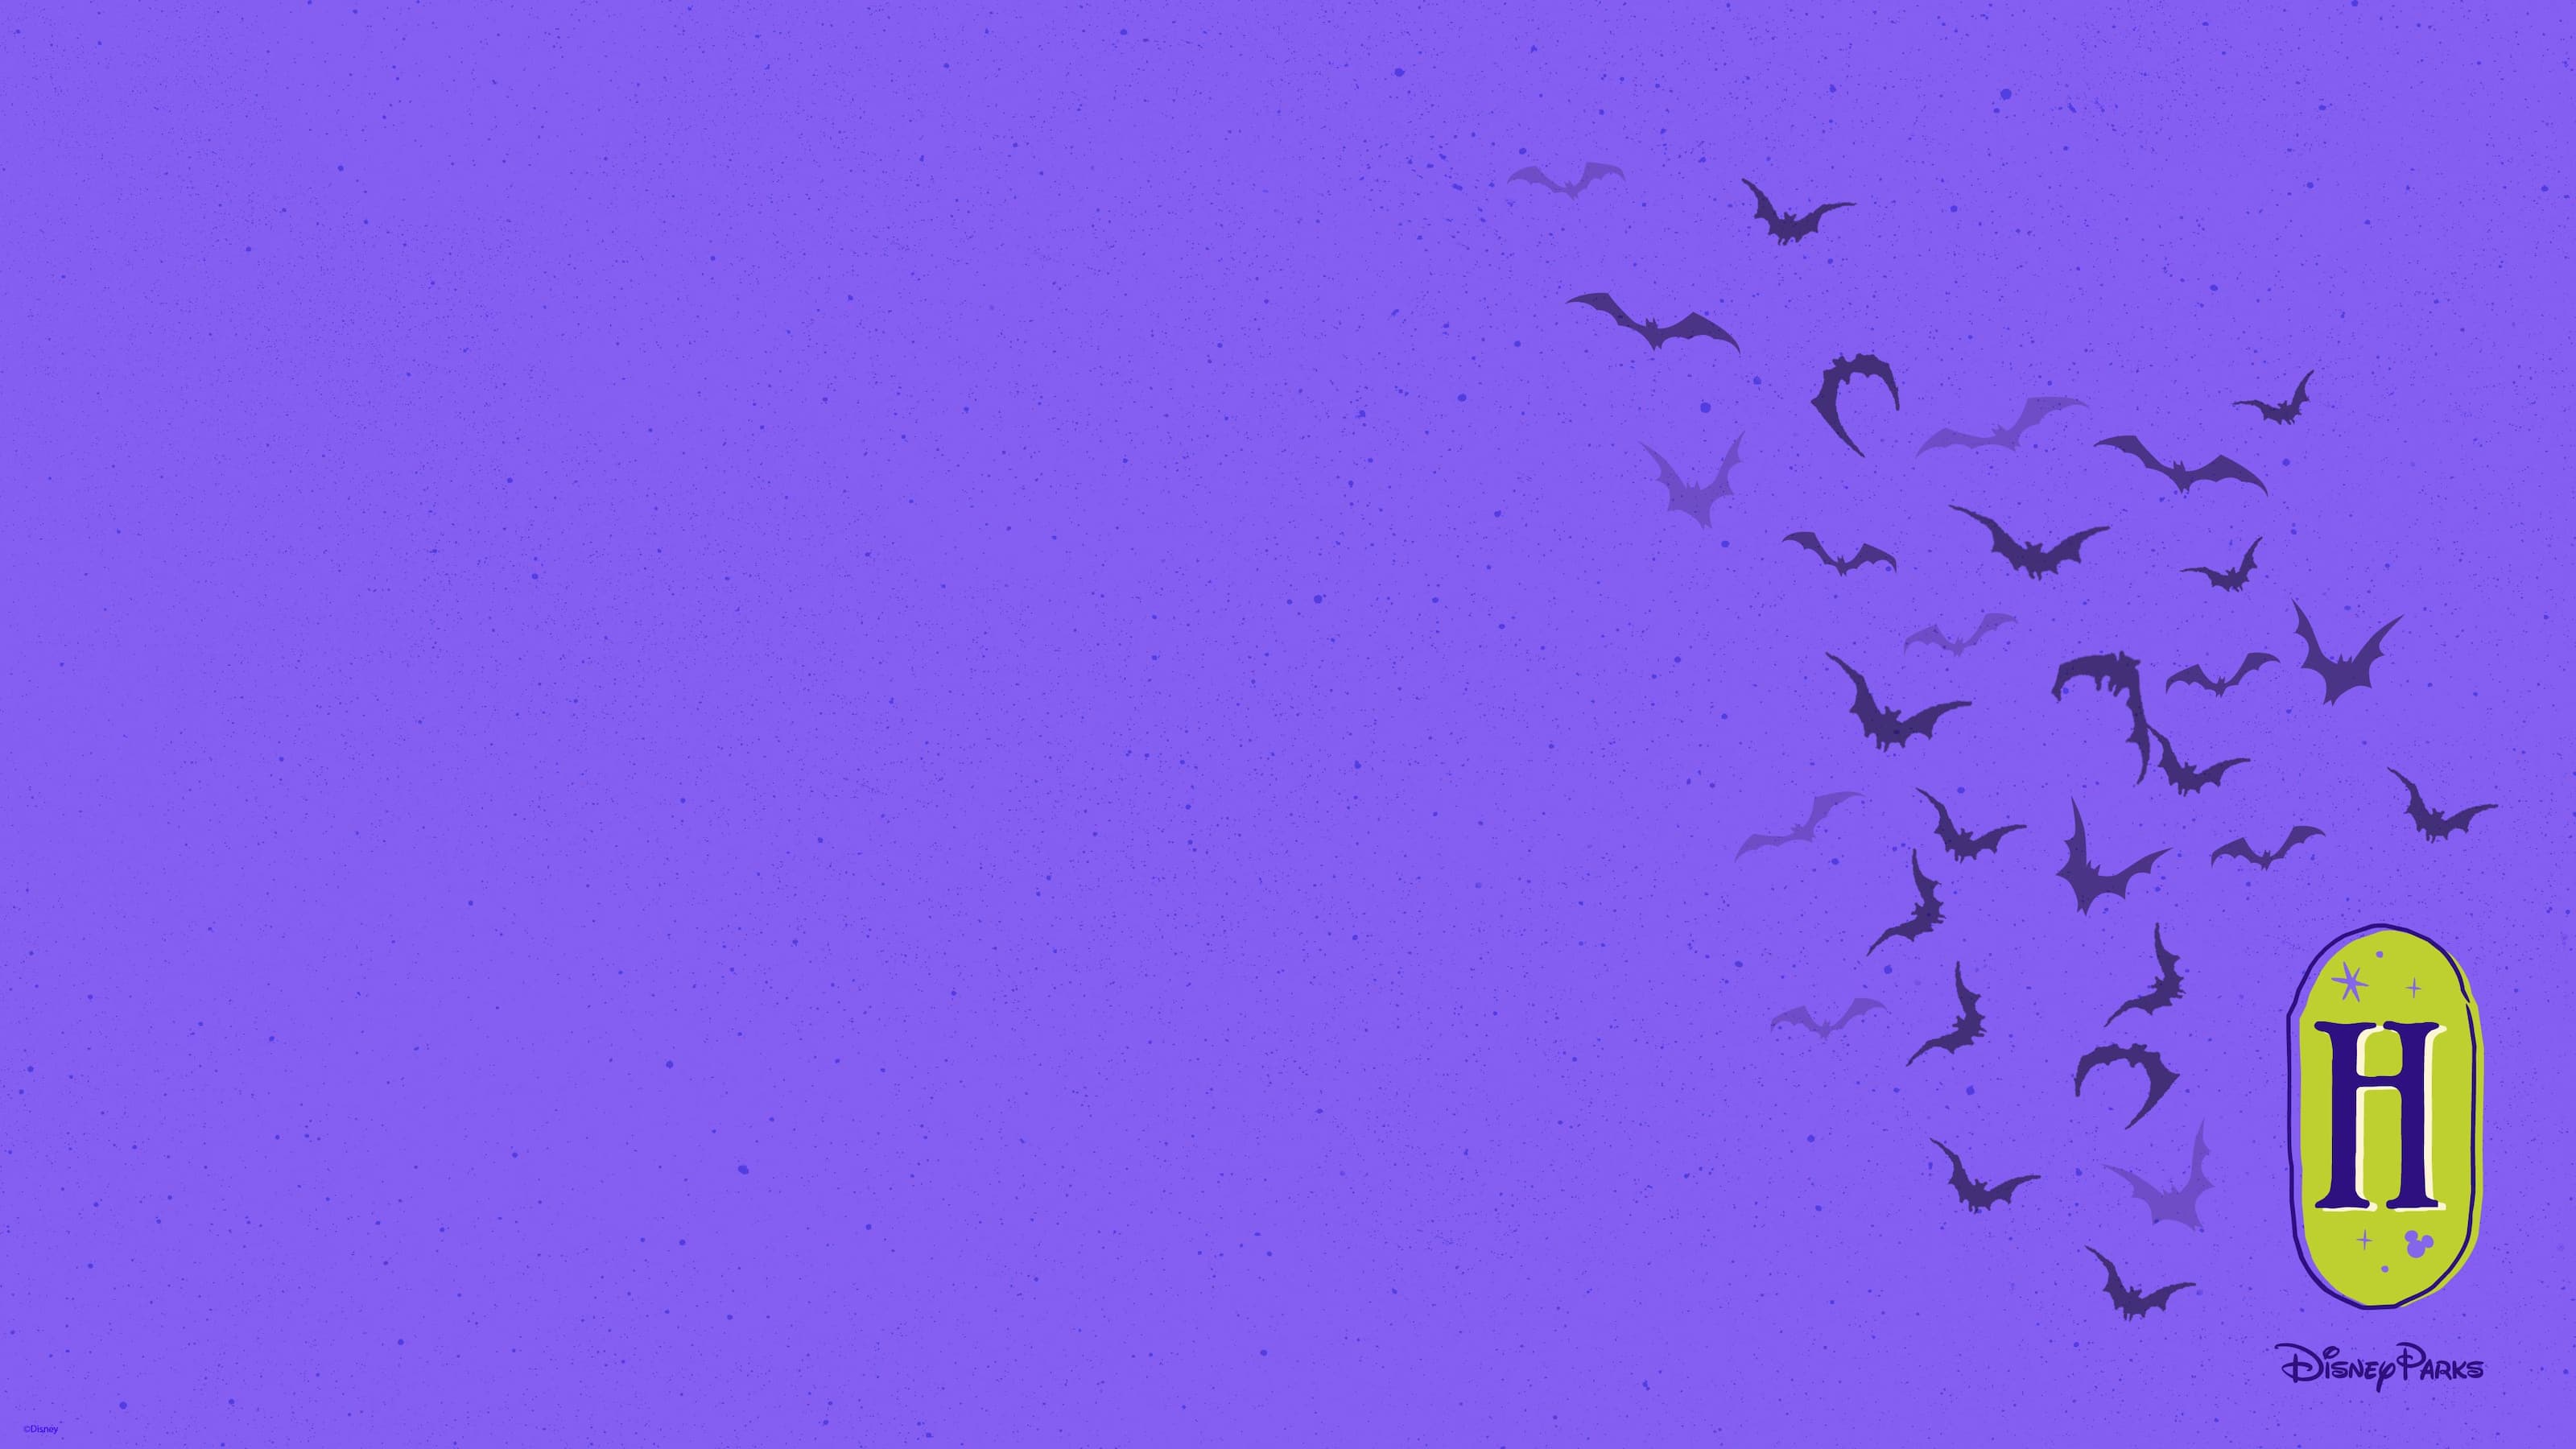 A purple background with flying birds - Halloween, Disney